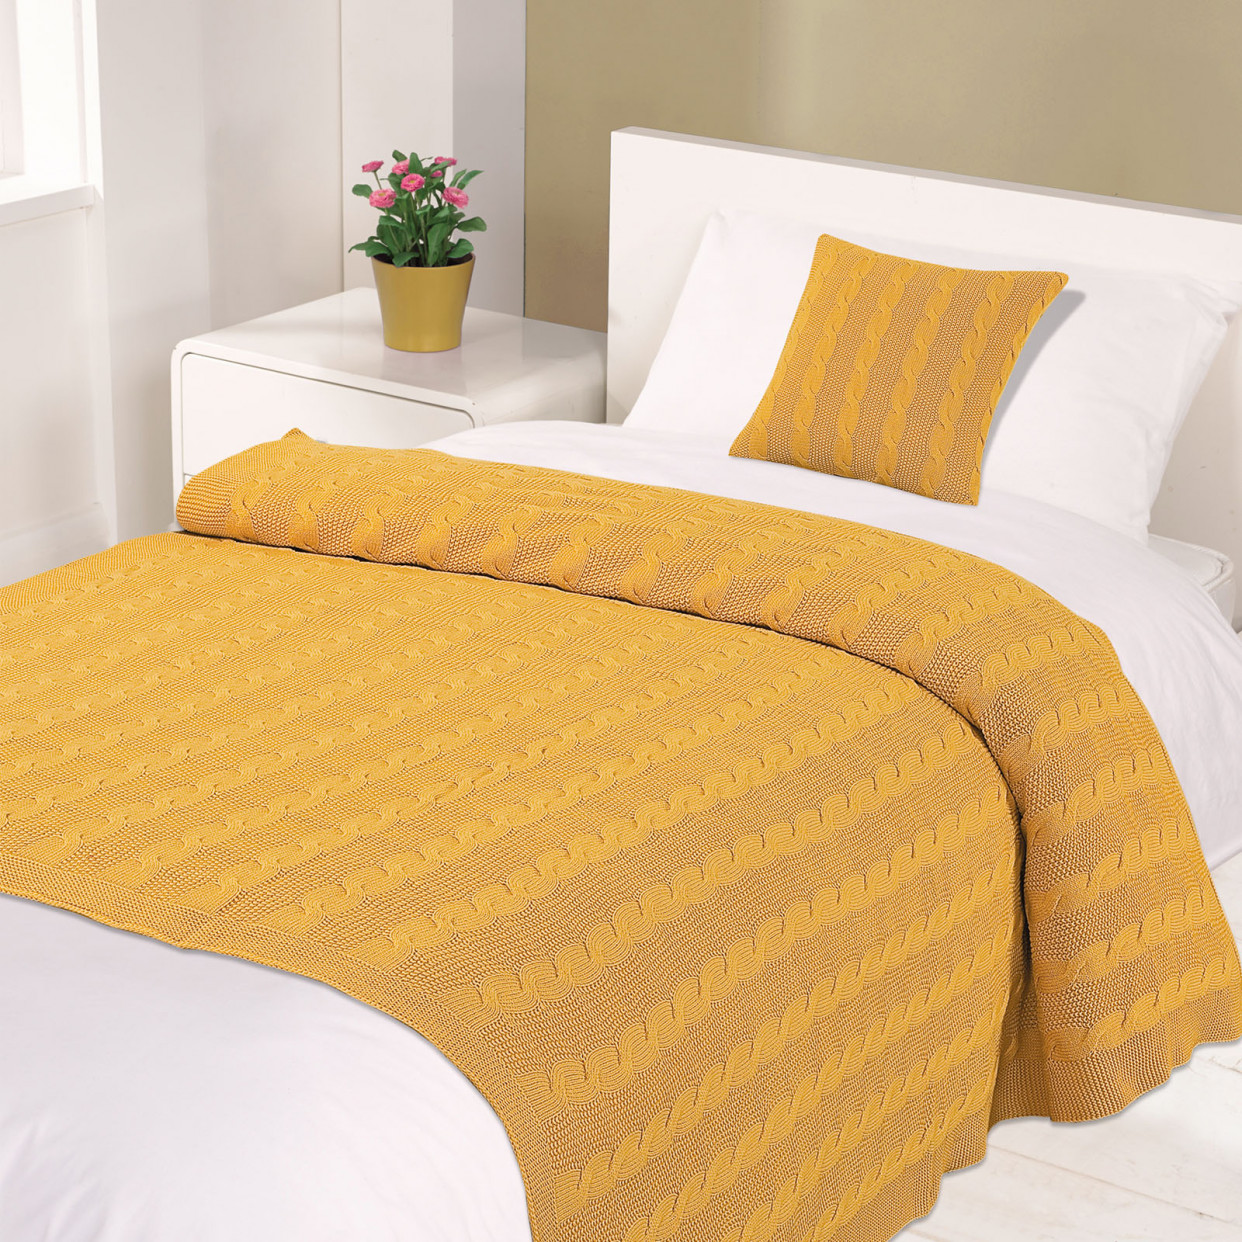 Highams 100% Cotton Woven Cable Knit Throw - Mustard Yellow Ochre - 125x150cm>